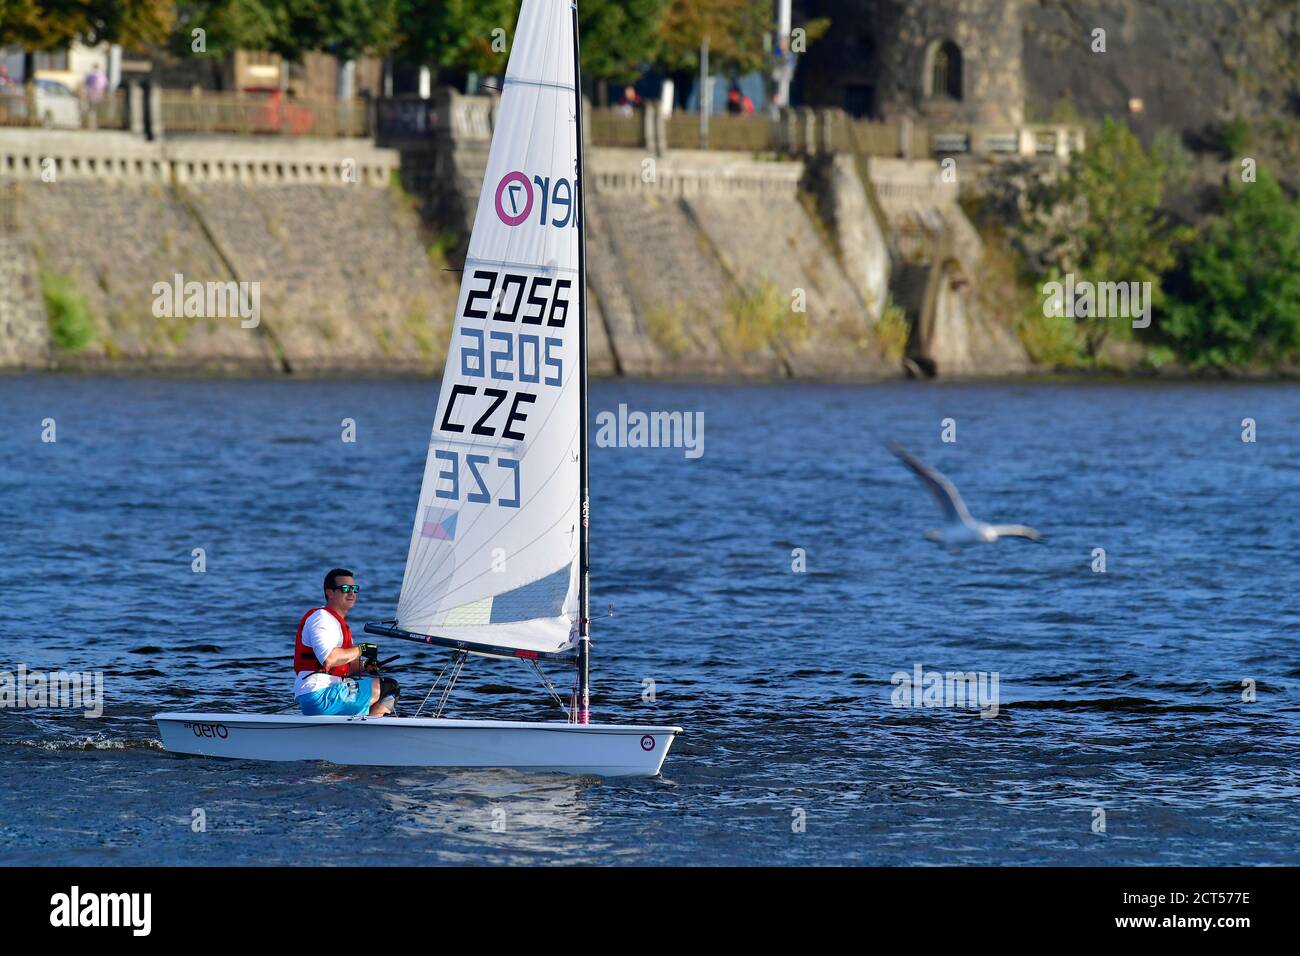 a yachtsman sailing on the river in the city Stock Photo